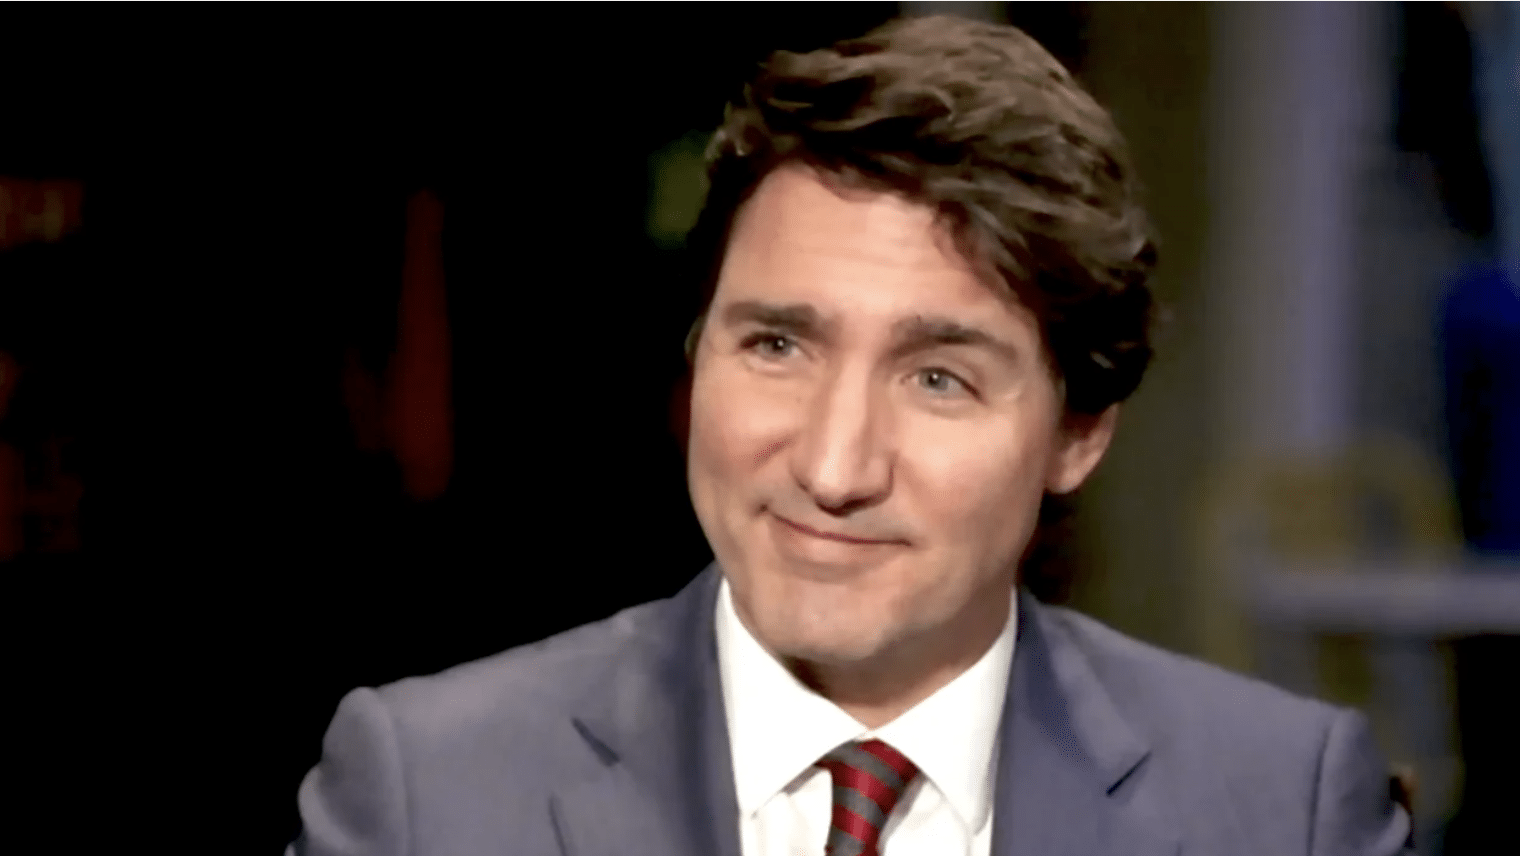 (WATCH) Justin Trudeau doubles down on calling trucker protesters ‘tinfoil hat’ conspiracy theorists